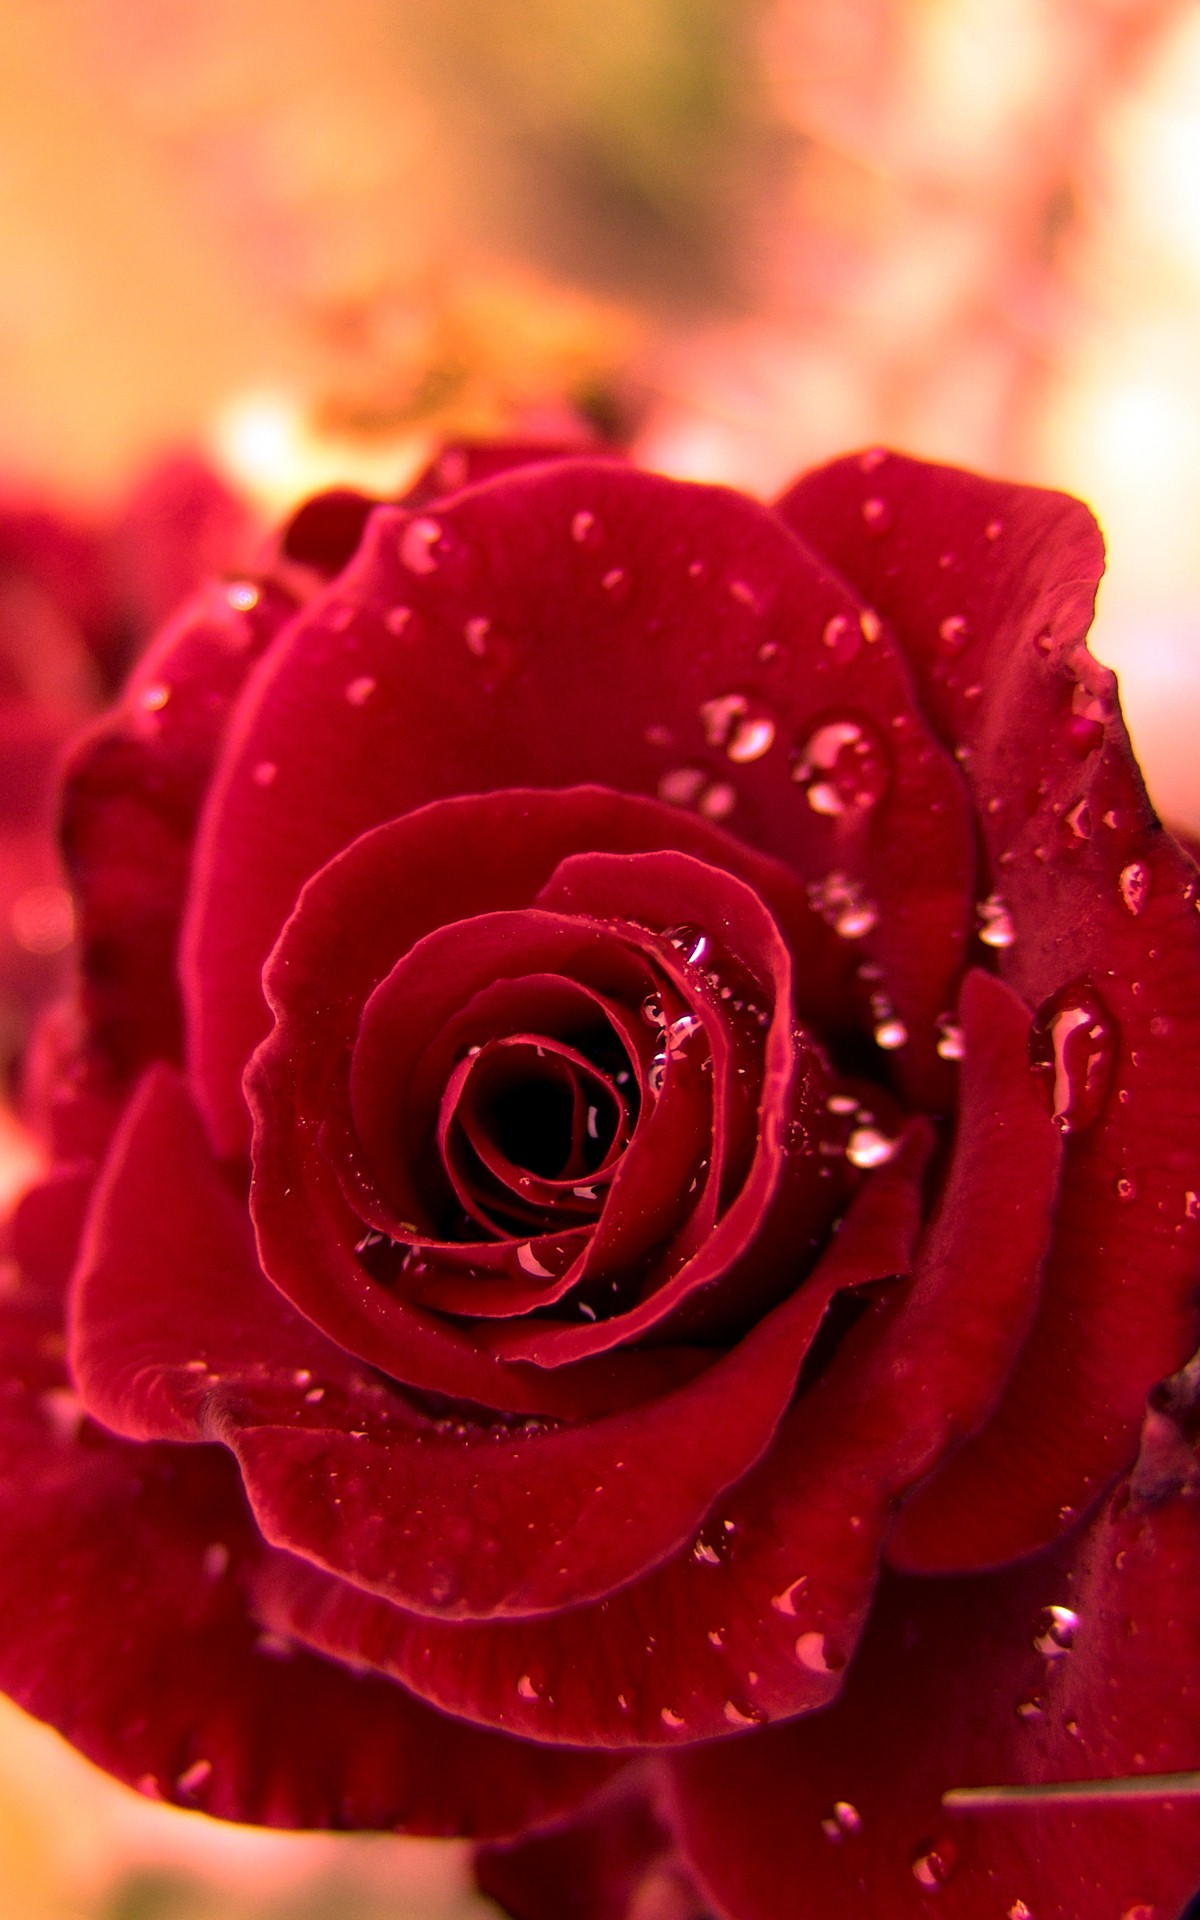 HD Red Rose Wallpaper iPhone resolution 1200x1920